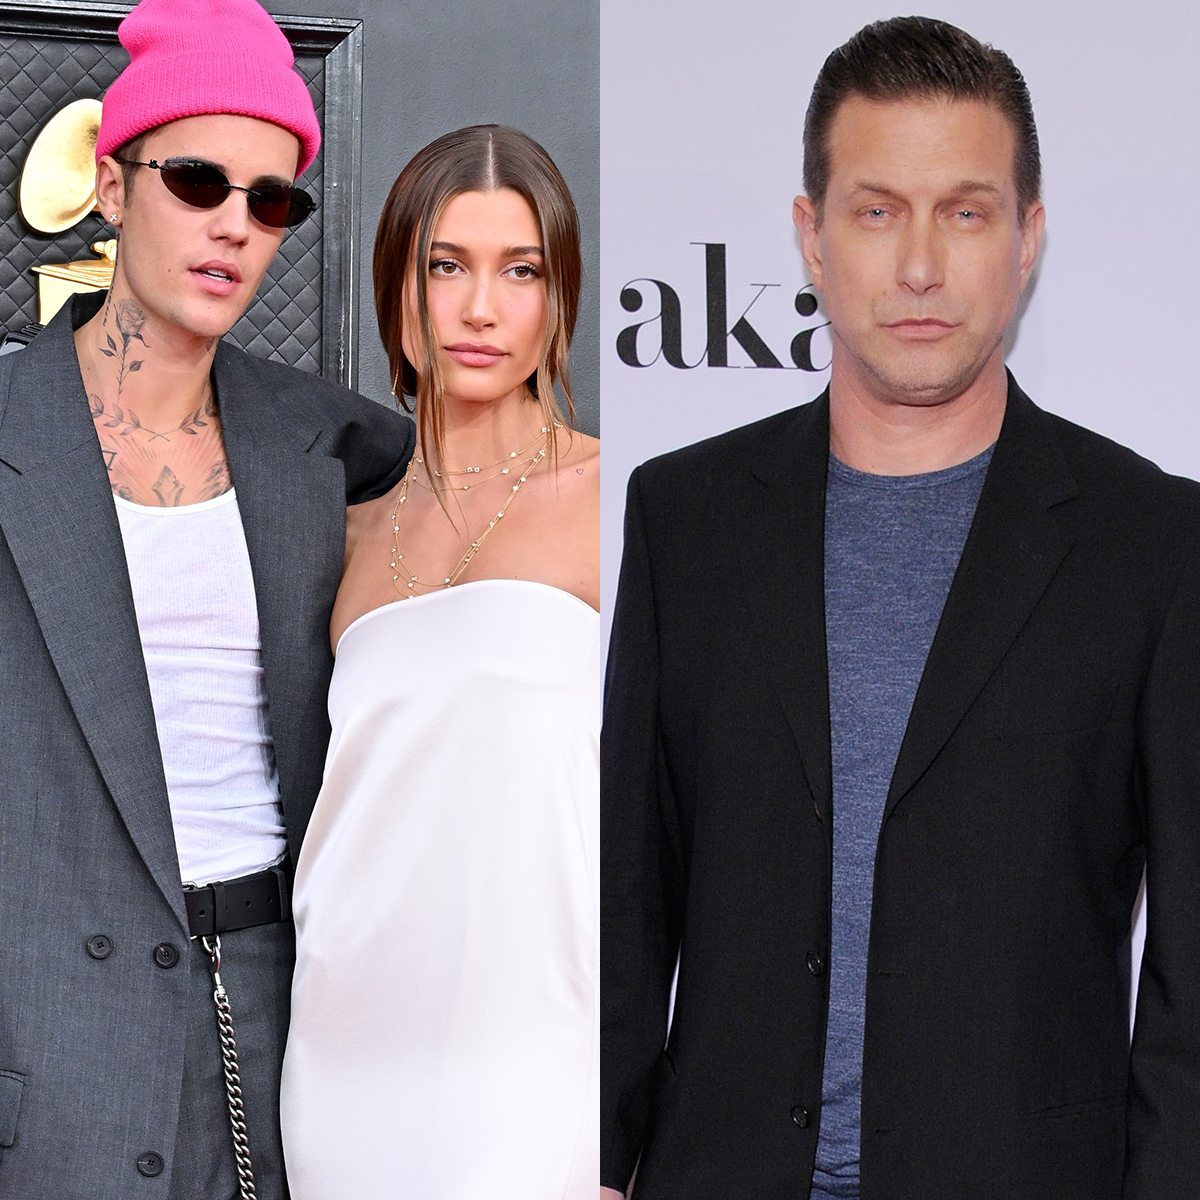 Image for article Stephen Baldwin Shares Cryptic Message After Praying for Justin and Hailey Bieber  E! Online  E! NEWS